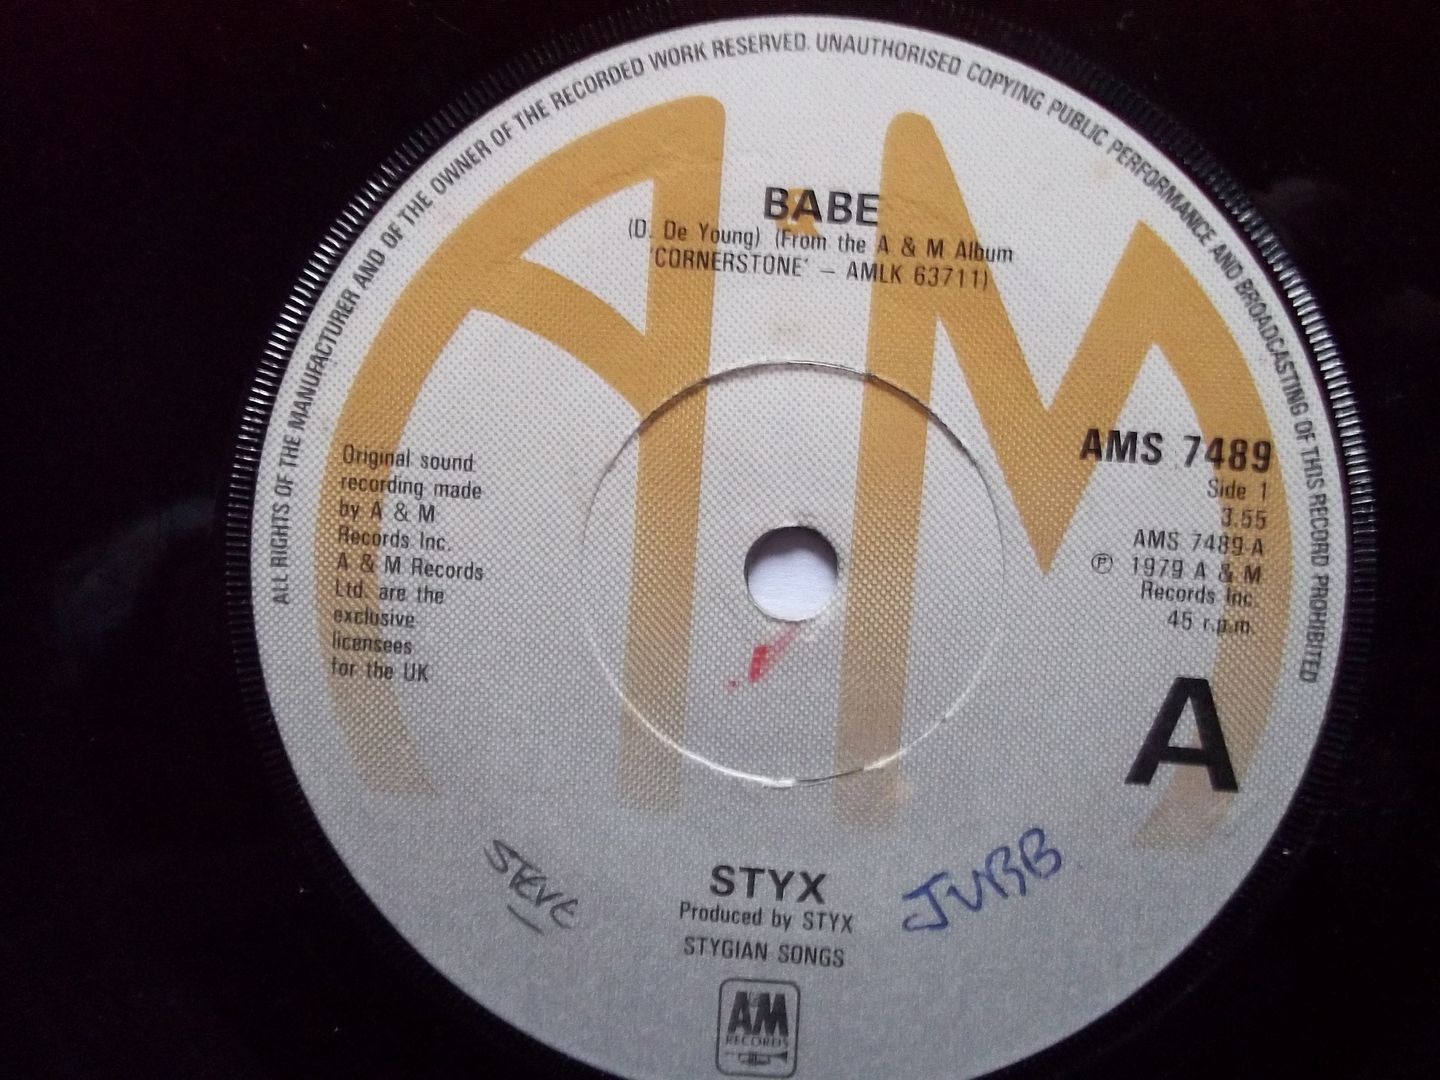 Styx Babe Records, LPs, Vinyl and CDs - MusicStack